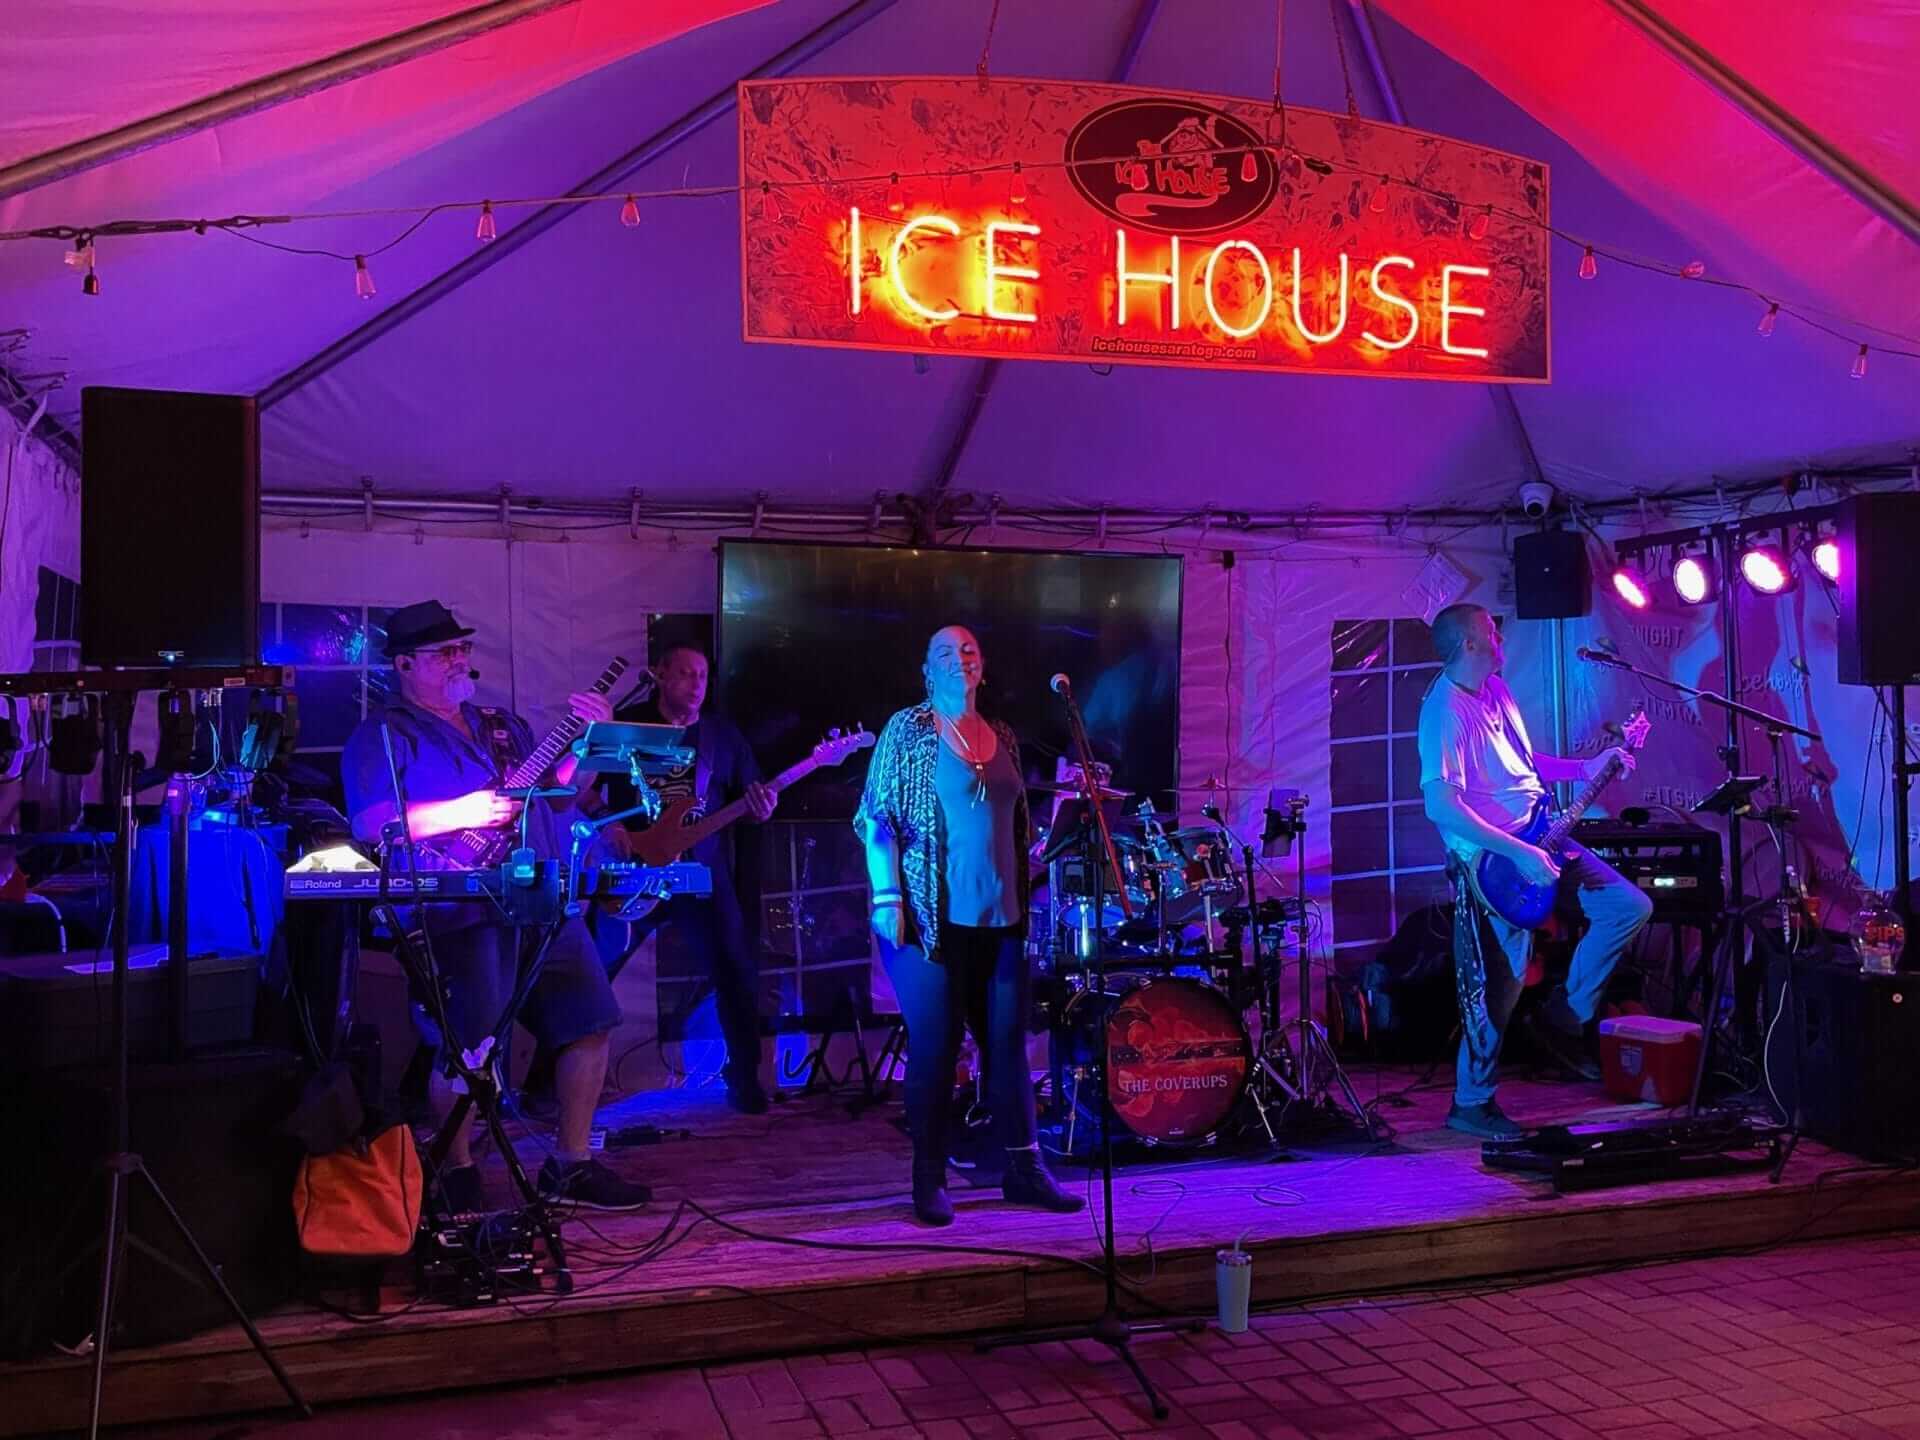 Performers at the Ice House on stage in Saratoga Springs